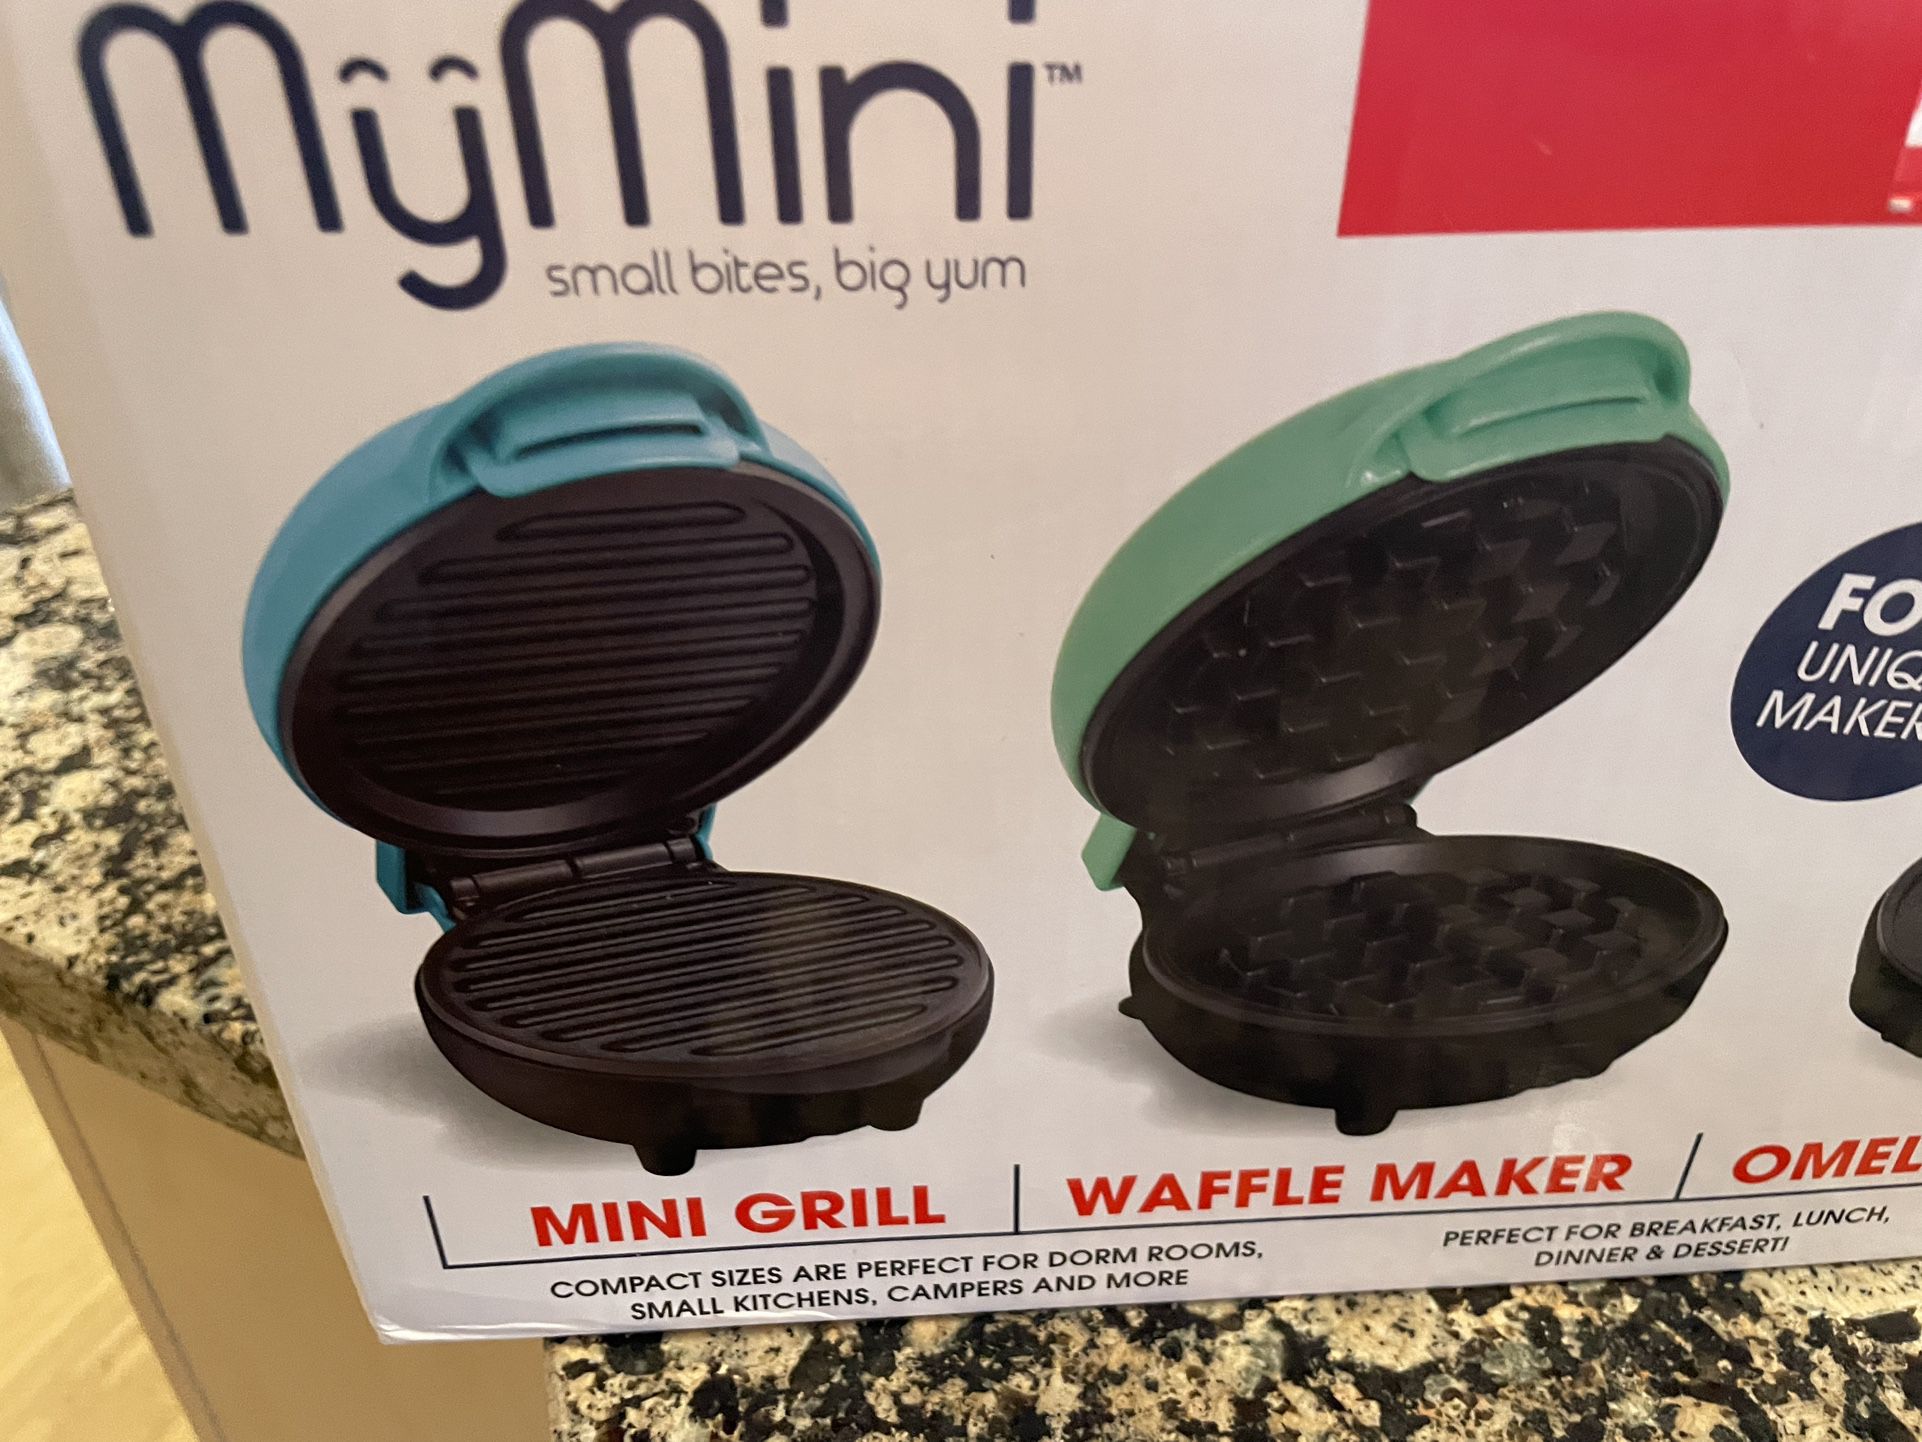 My Mini Waffle, Grill, Donut & Omelette Maker 4 Pack Value Set, New In Box